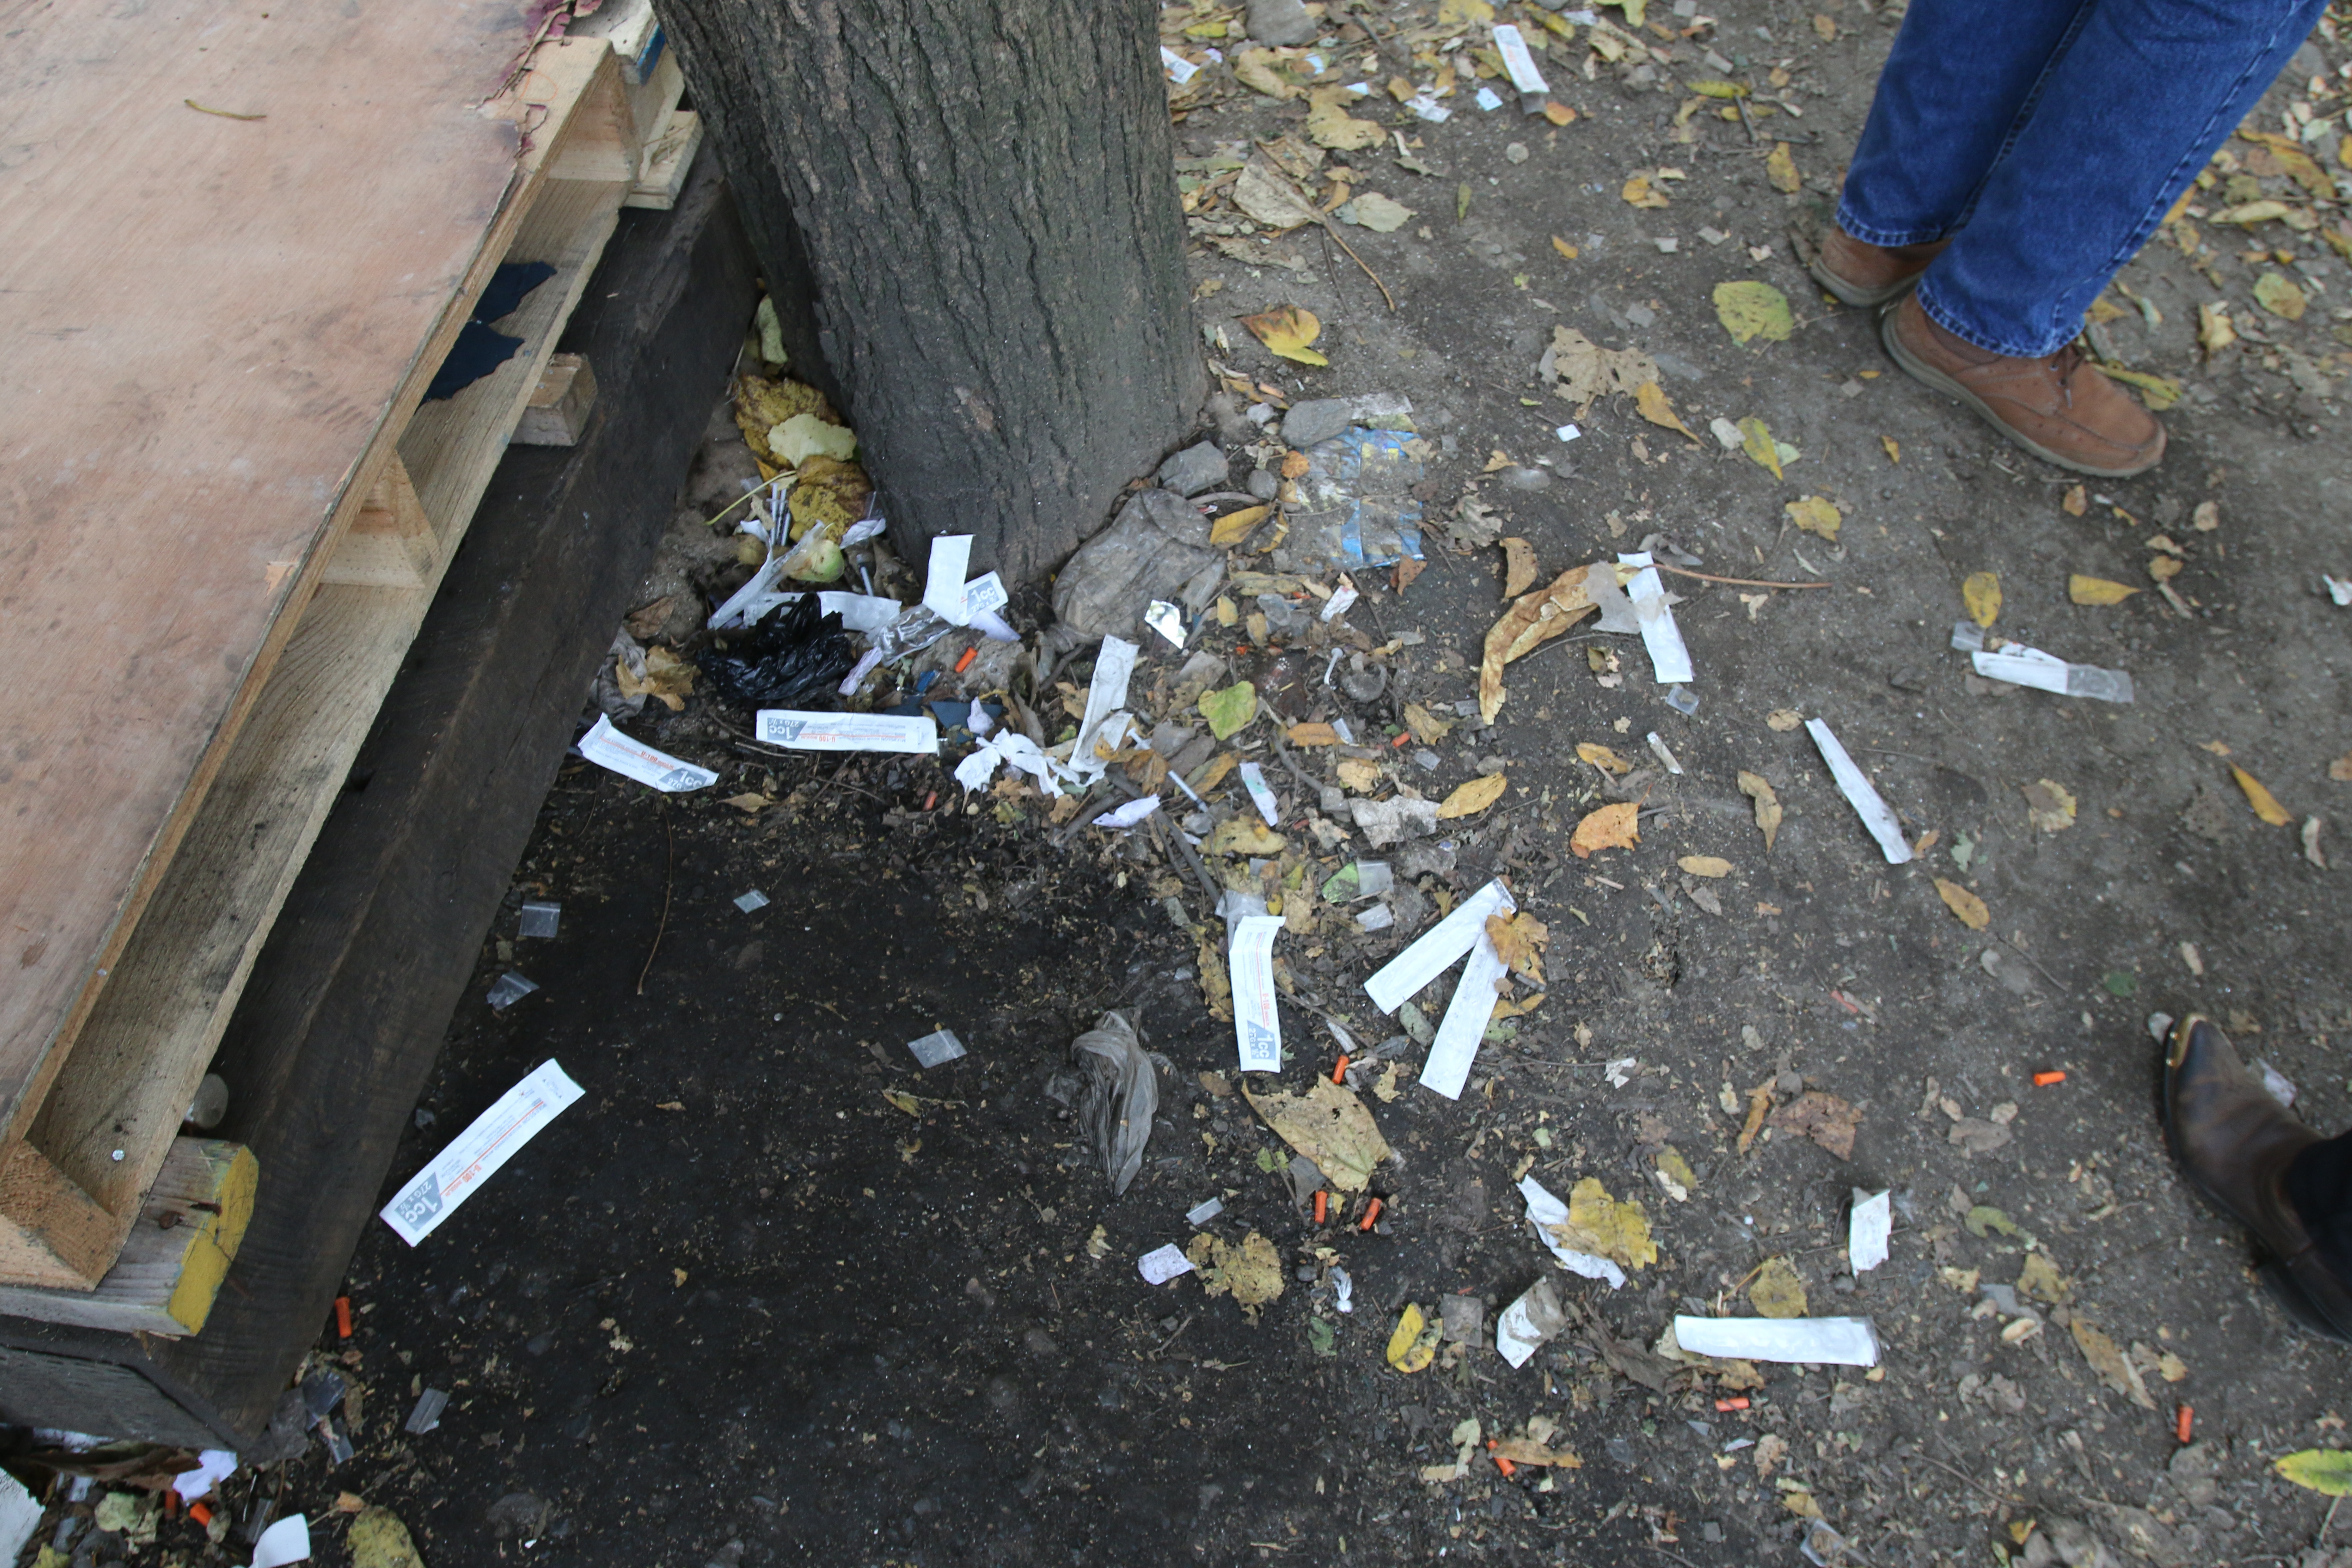 Packages of hypodermic needles (\"works&quot;) litter the Conrail railroad tracks that run parallel to Lehigh Avenue. AL DÍA file photo.